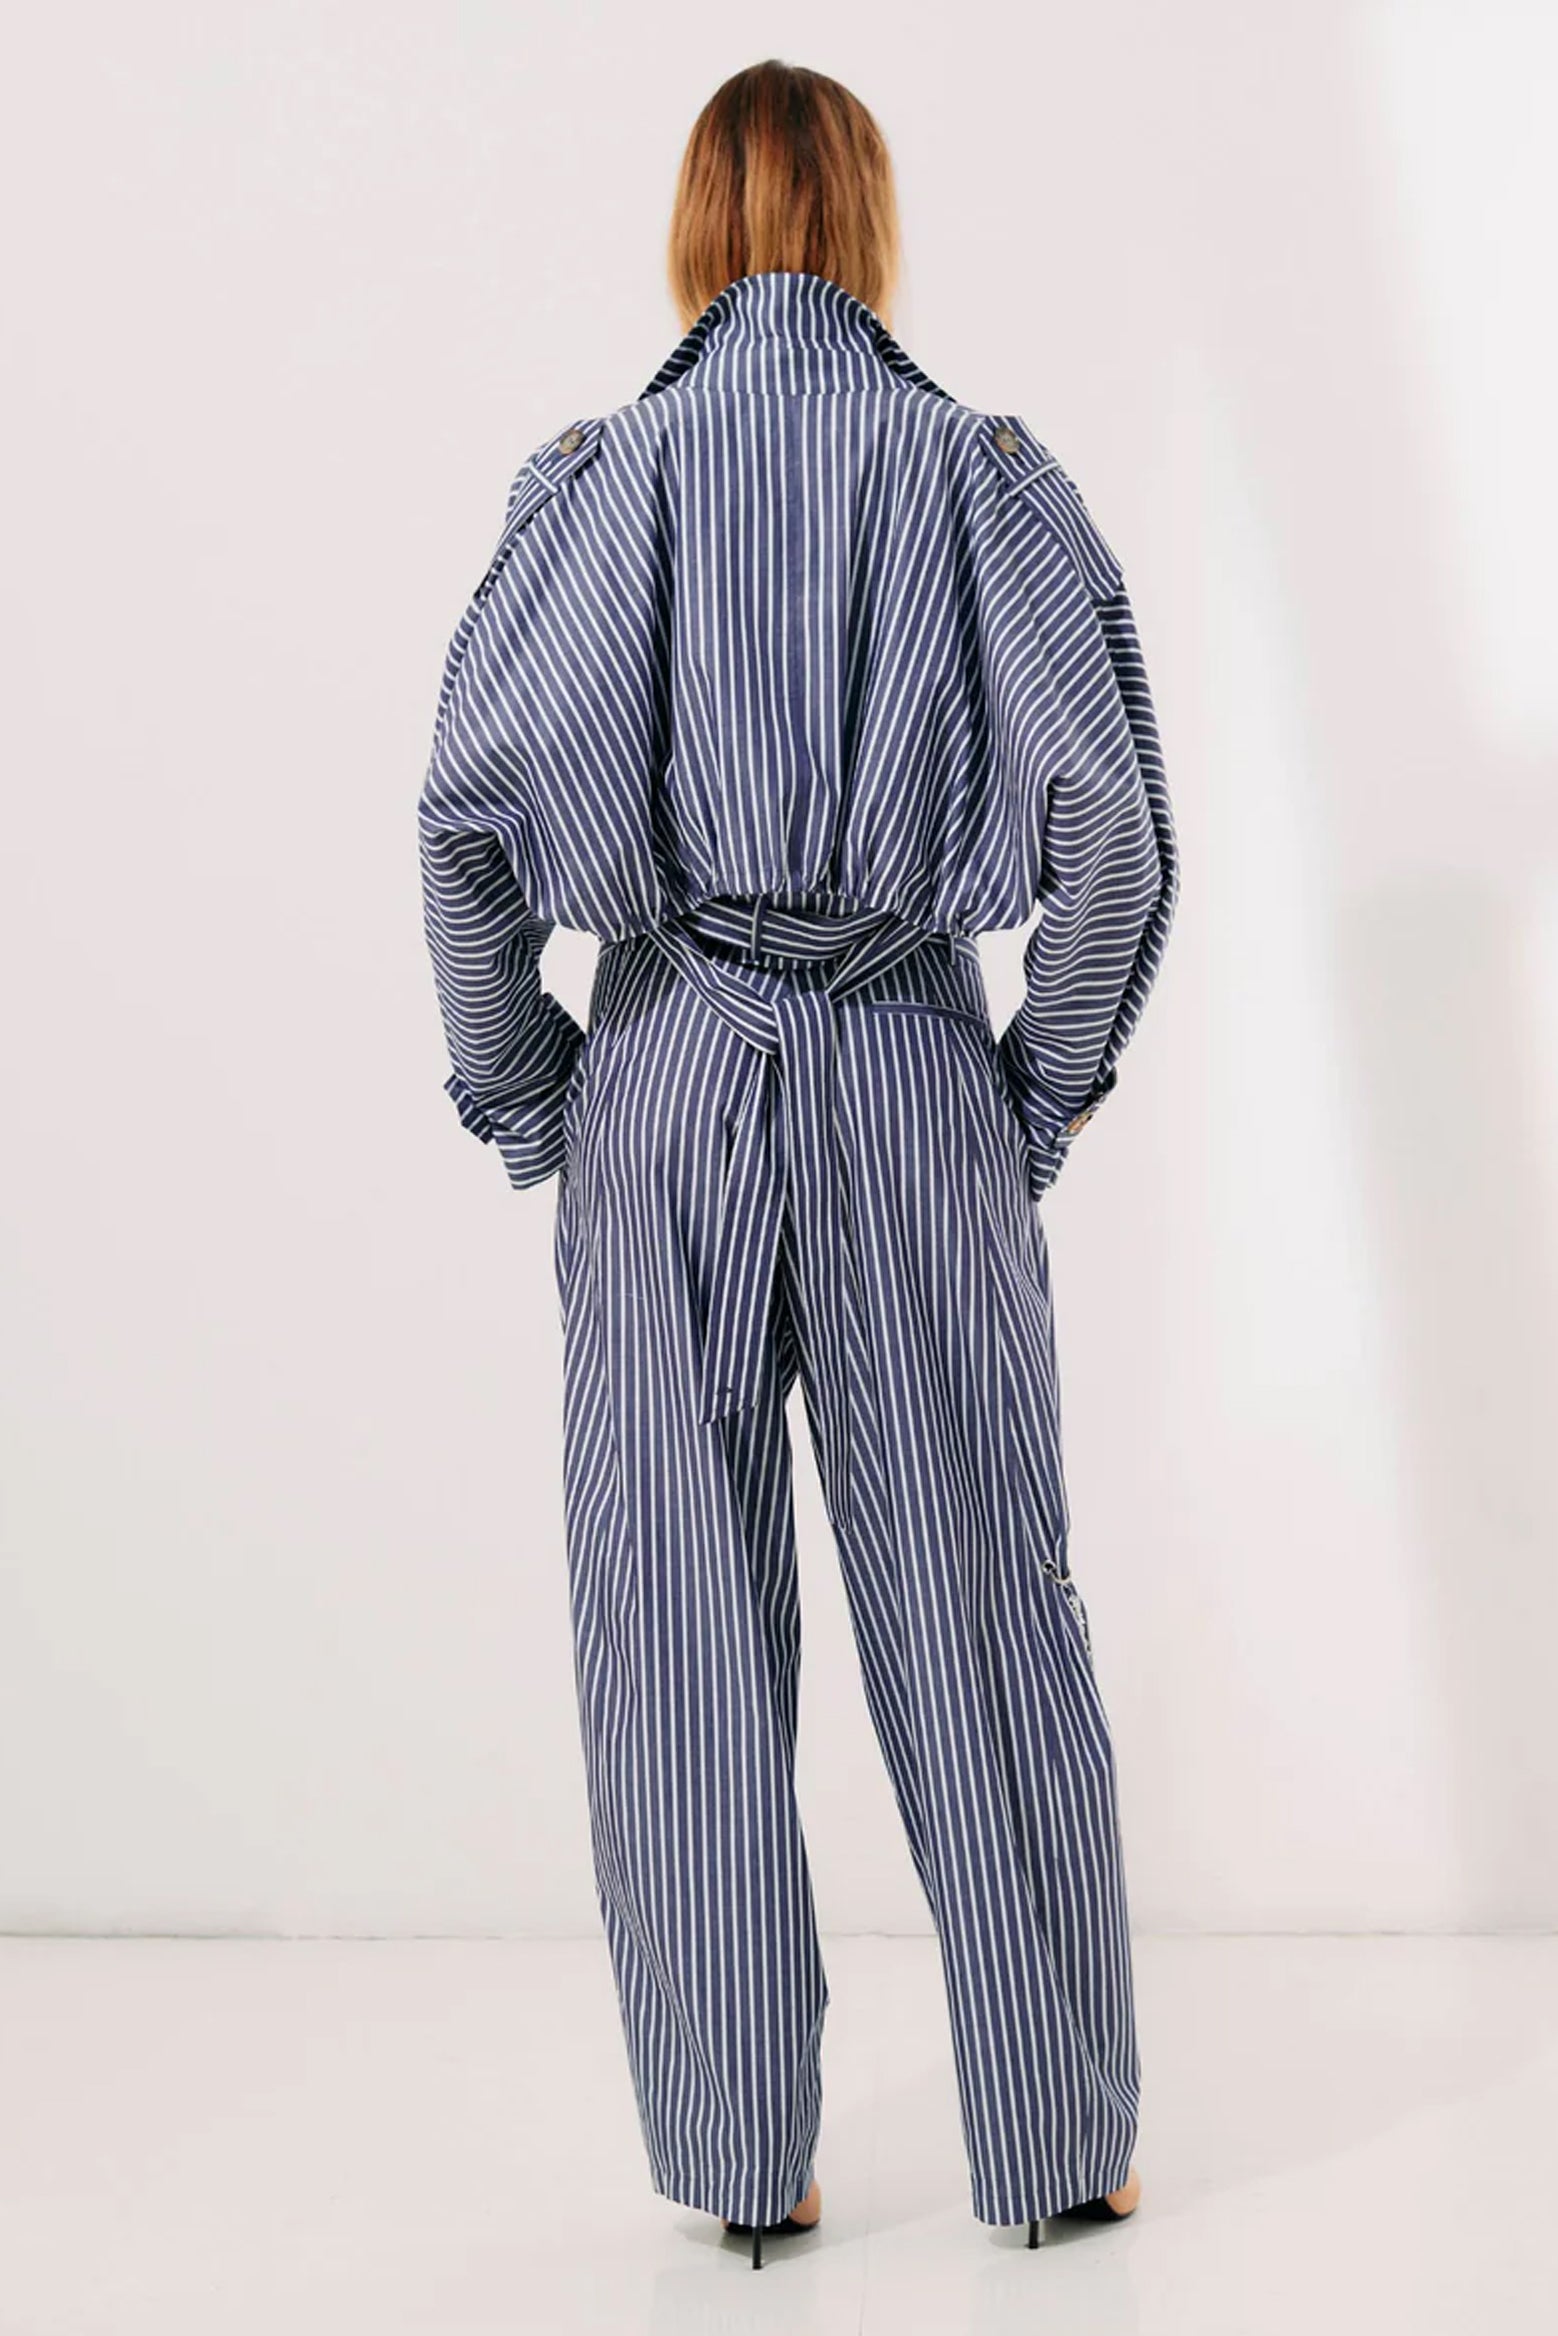 Darkpark Phebe Wide Leg Pants in Raw Blue/White available at The New Trend Australia.